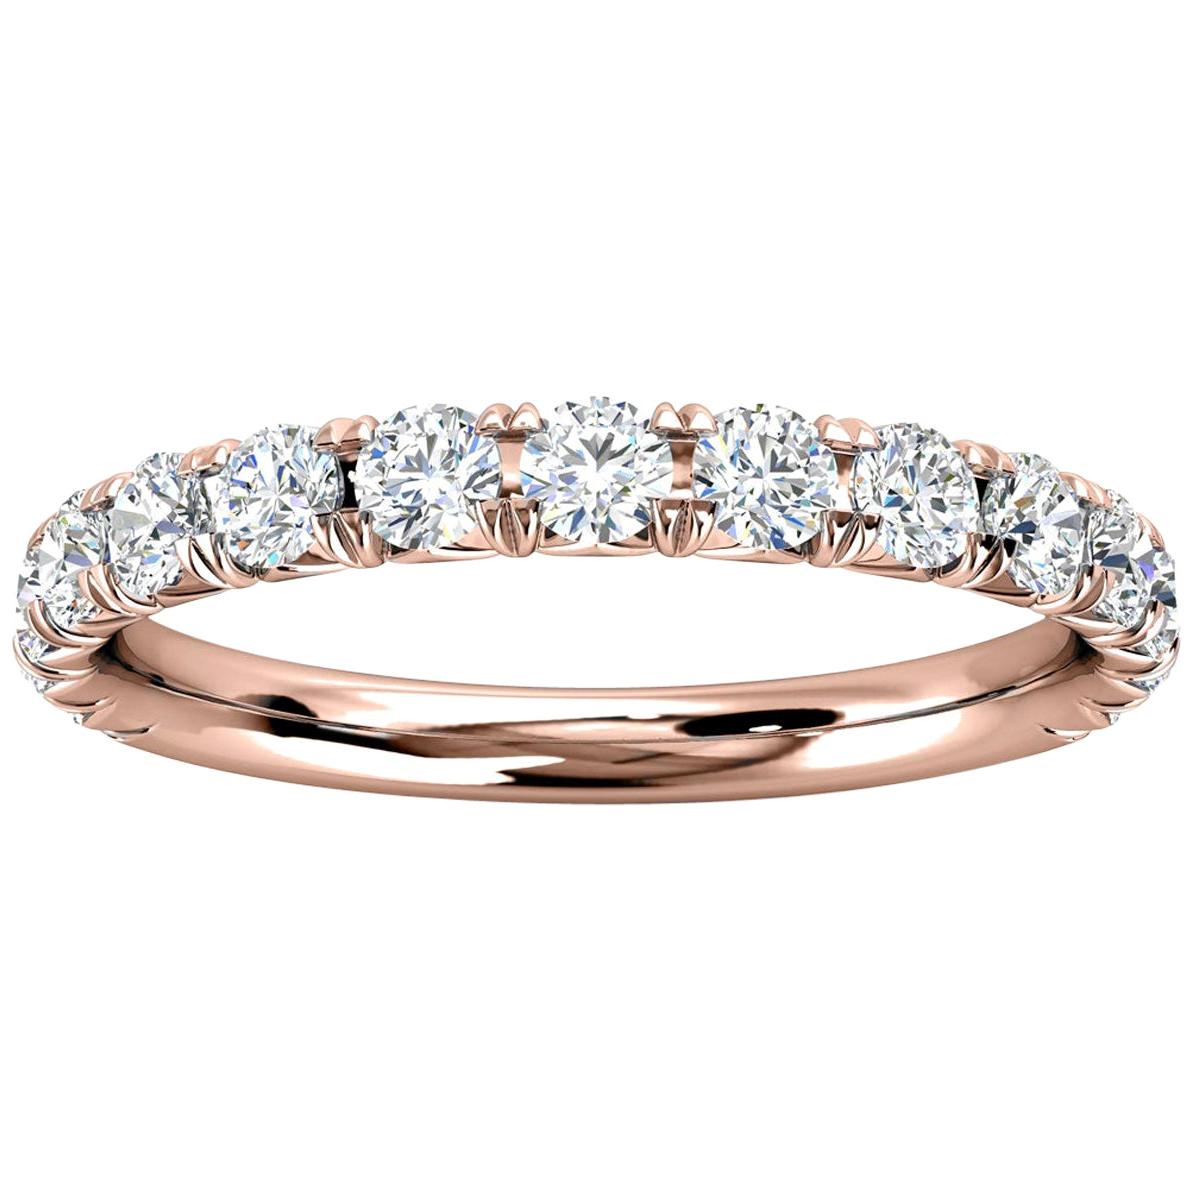 For Sale:  18k Rose Gold GIA French Pave Diamond Ring '3/4 ct. tw'